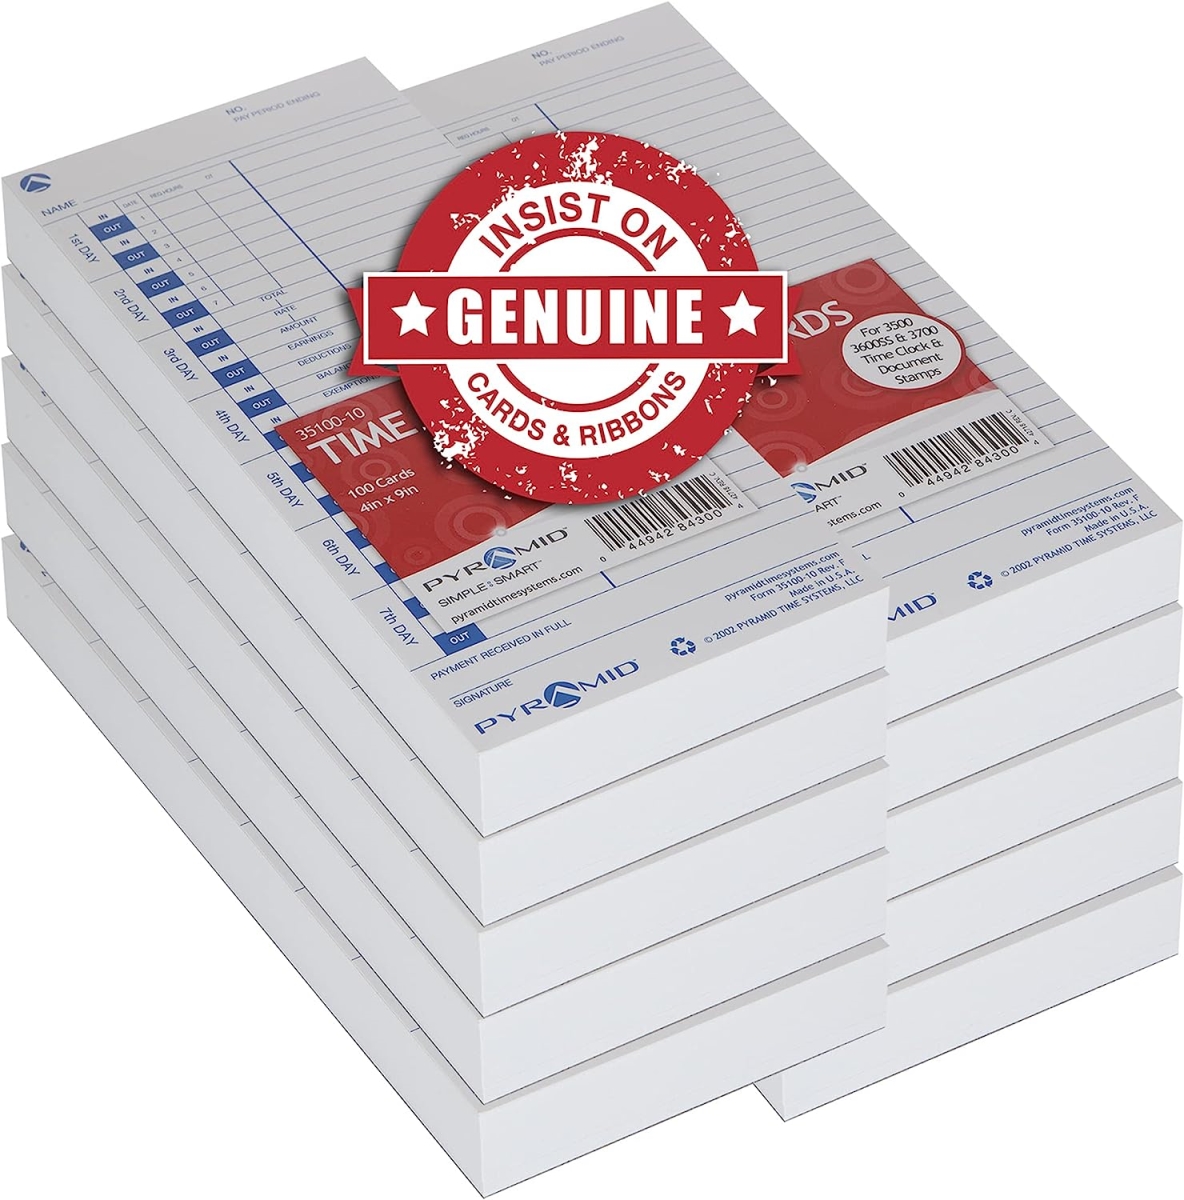 Picture of Pyramid Time Systems 35100-10MB Attendance Cards for Time Clock Models 3500-3550SS-3600SS-3700, White - 1000 per pack